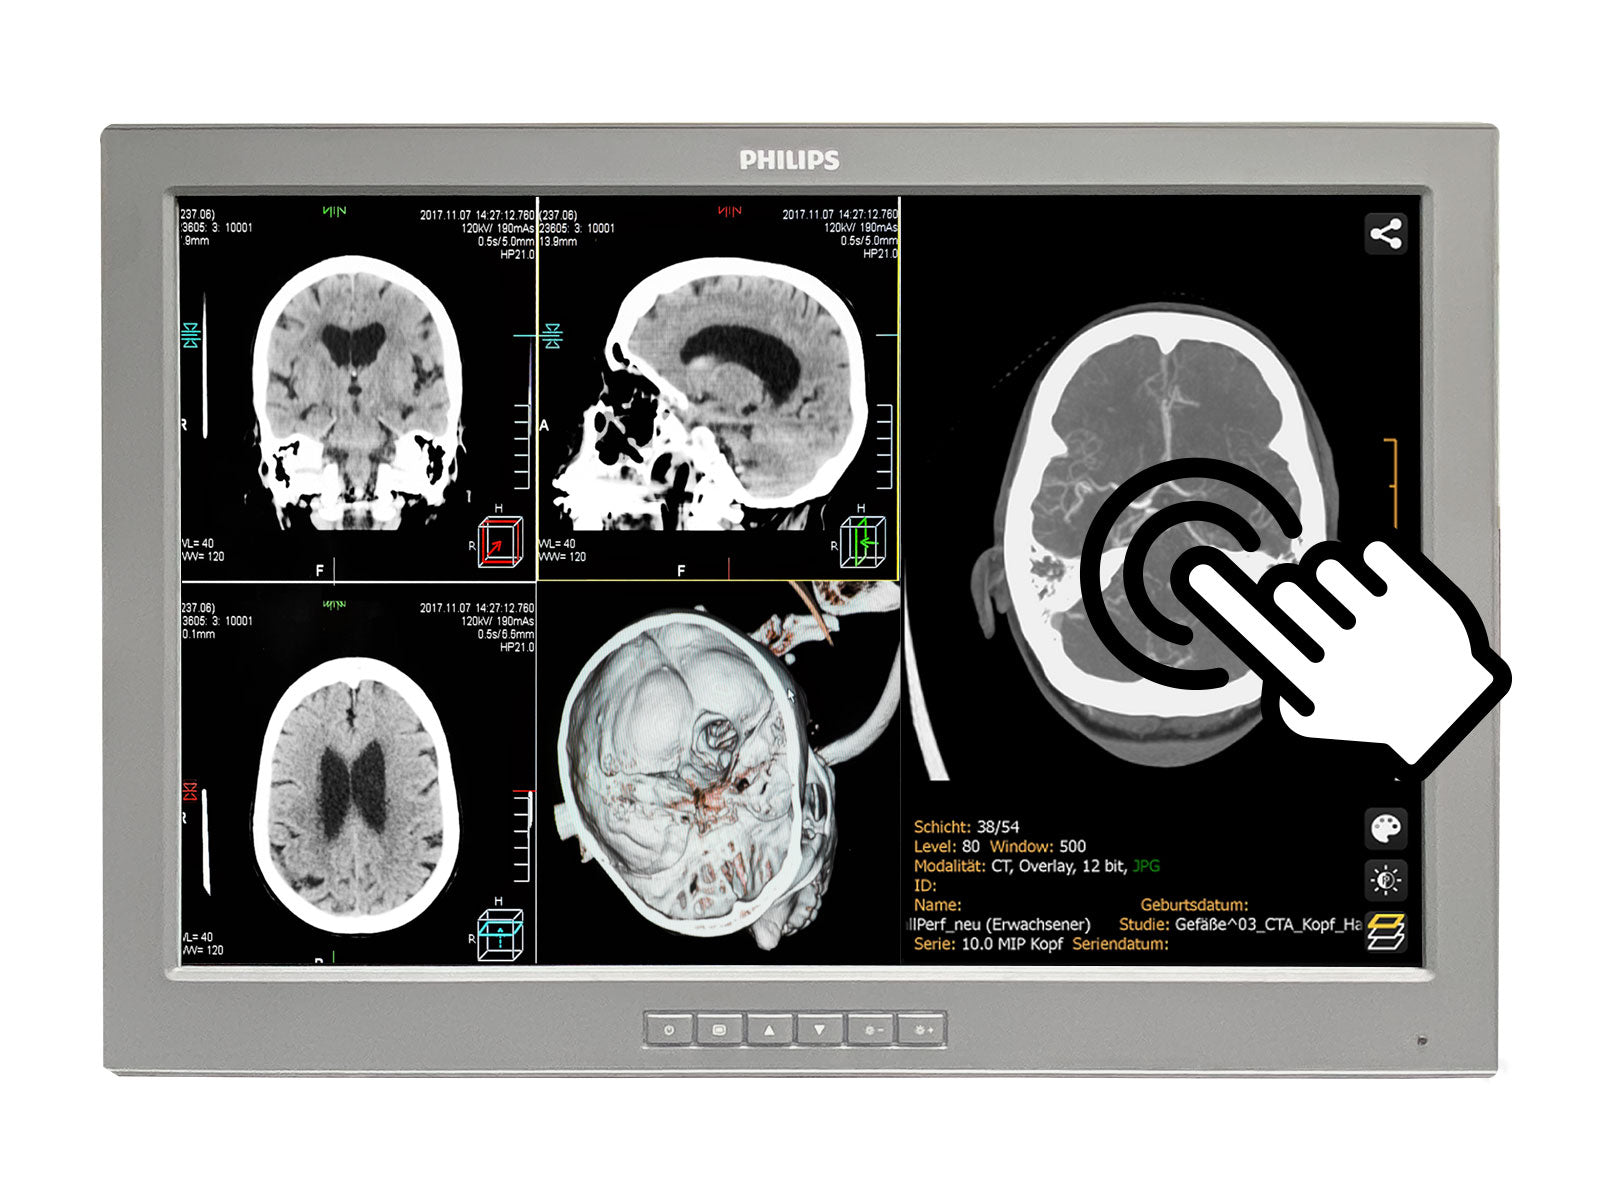 Barco P240-LTv Touchscreen MED24ESB 24" WUXGA 1920 x 1200 2MP Philips DICOM Clinical Review Monitor by Fimi Barco (P240-LTv) Monitors.com 